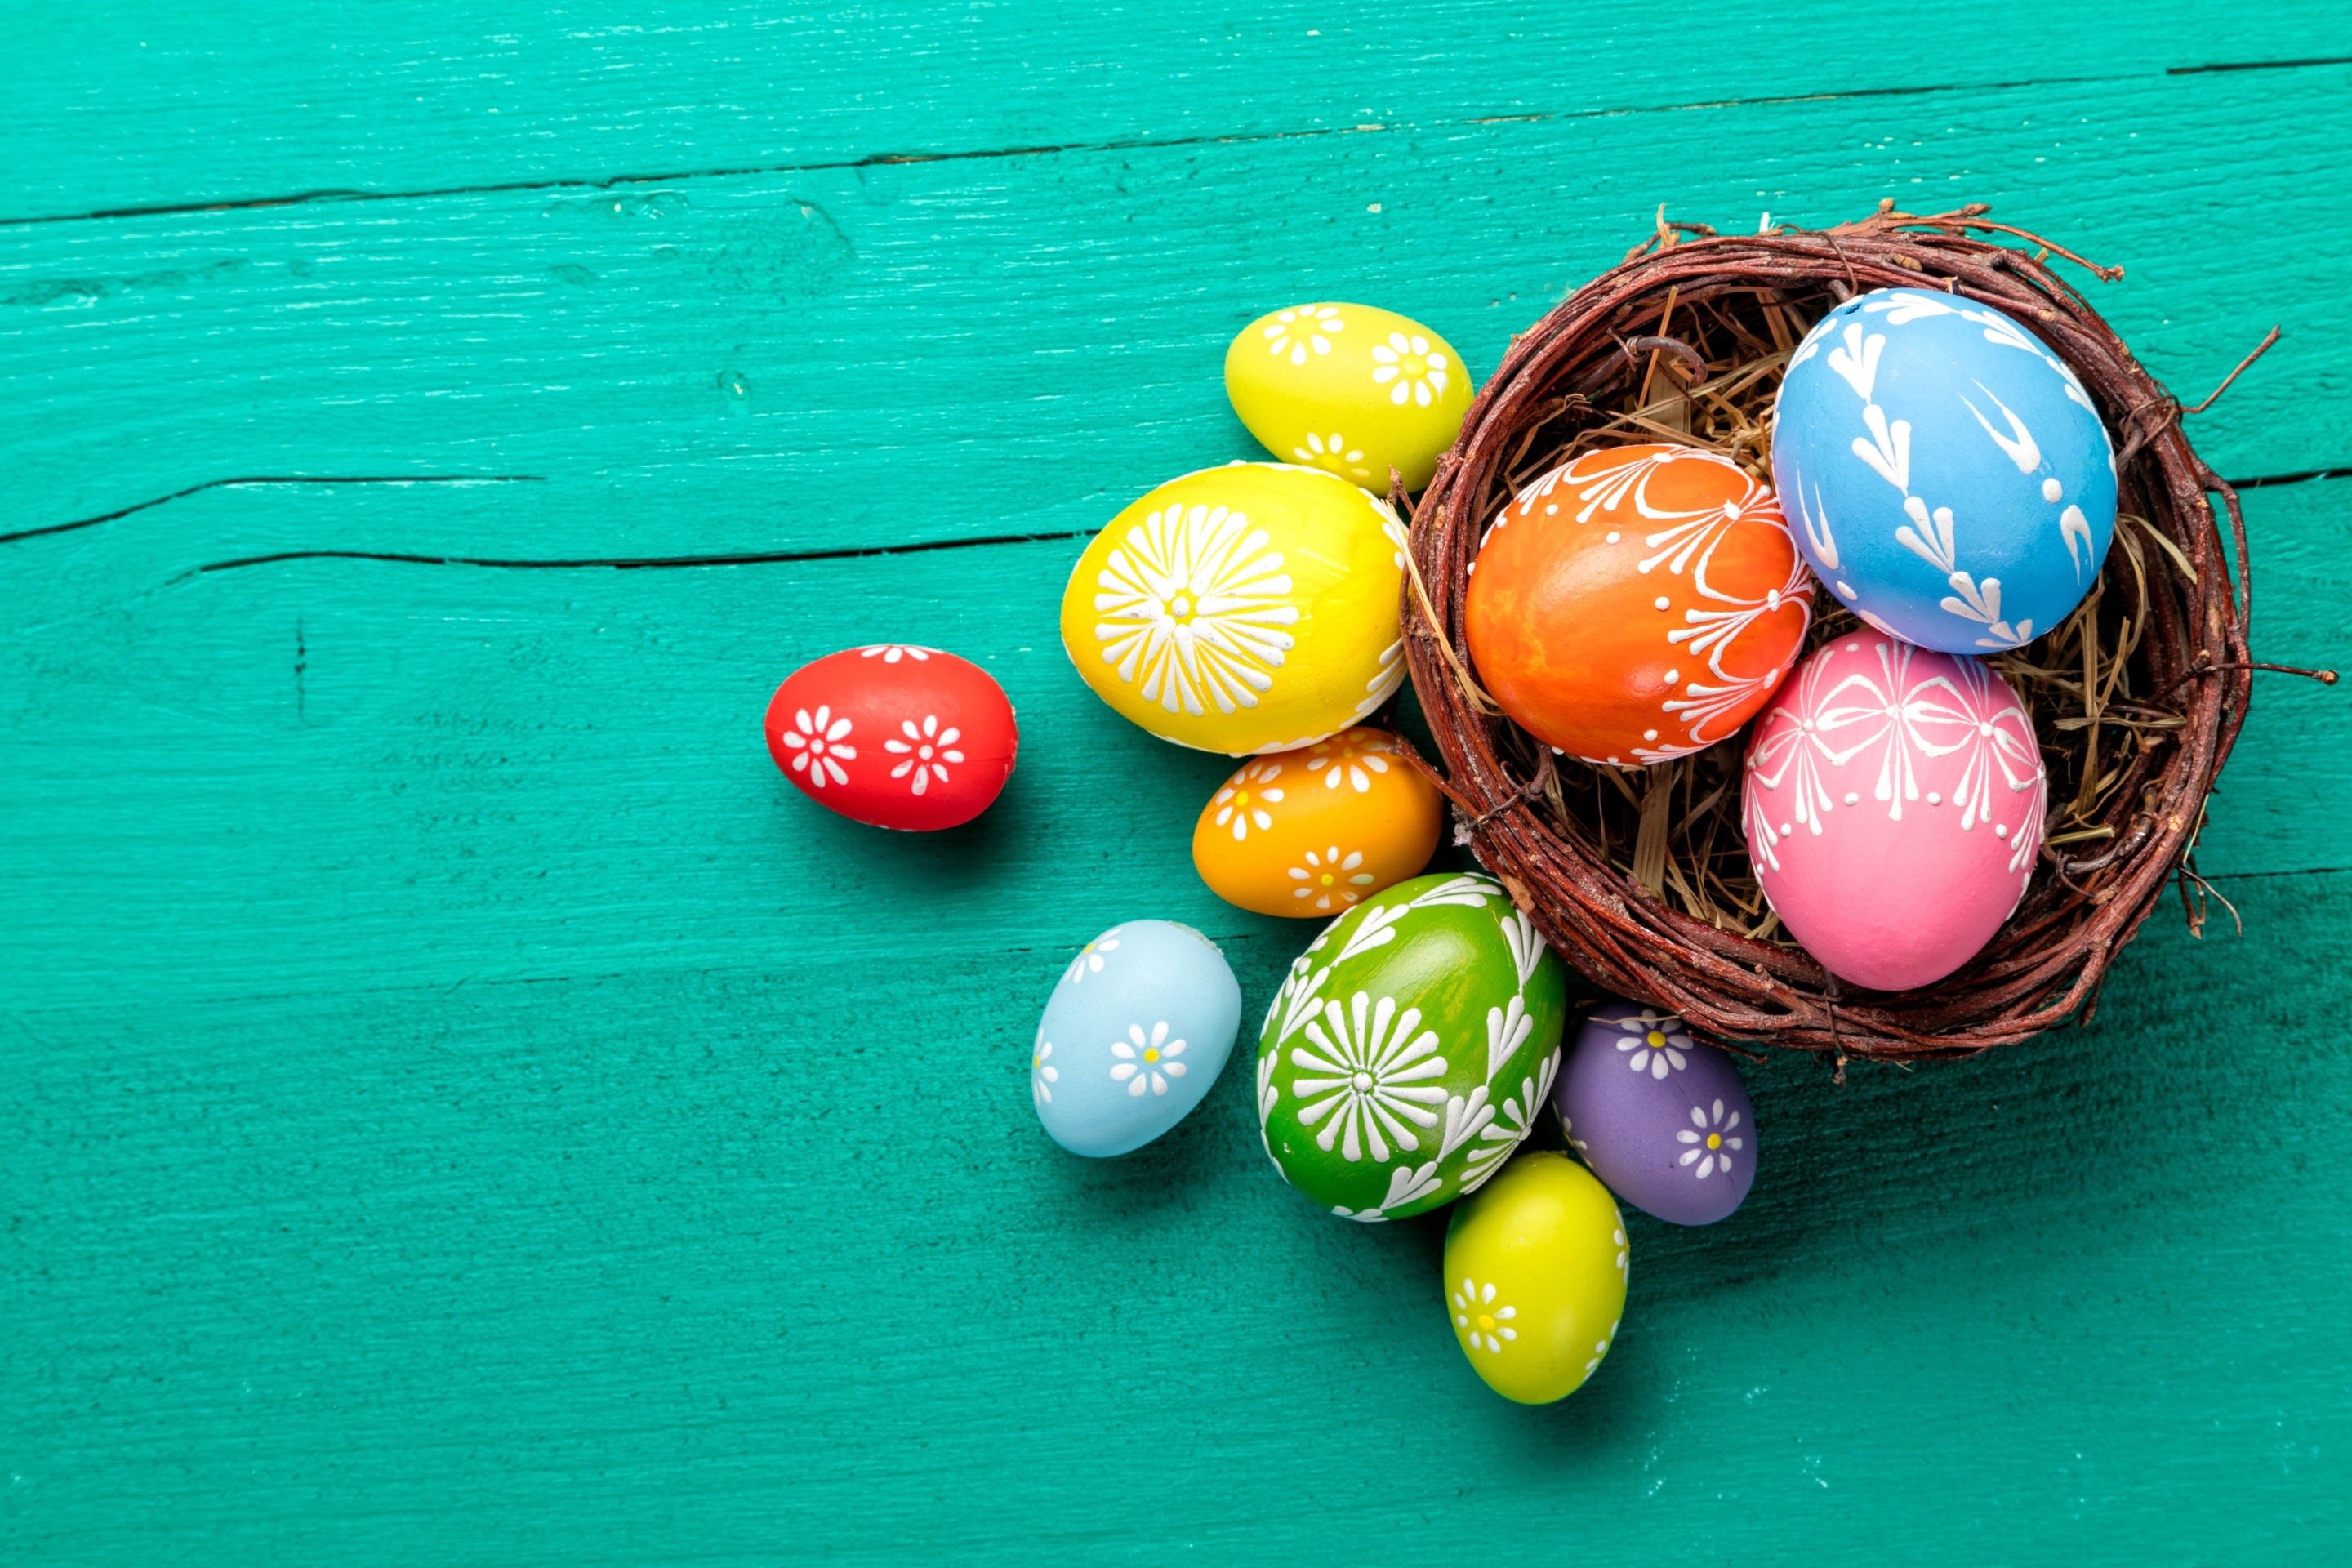 Dyed easter eggs wallpaper 2880x1920